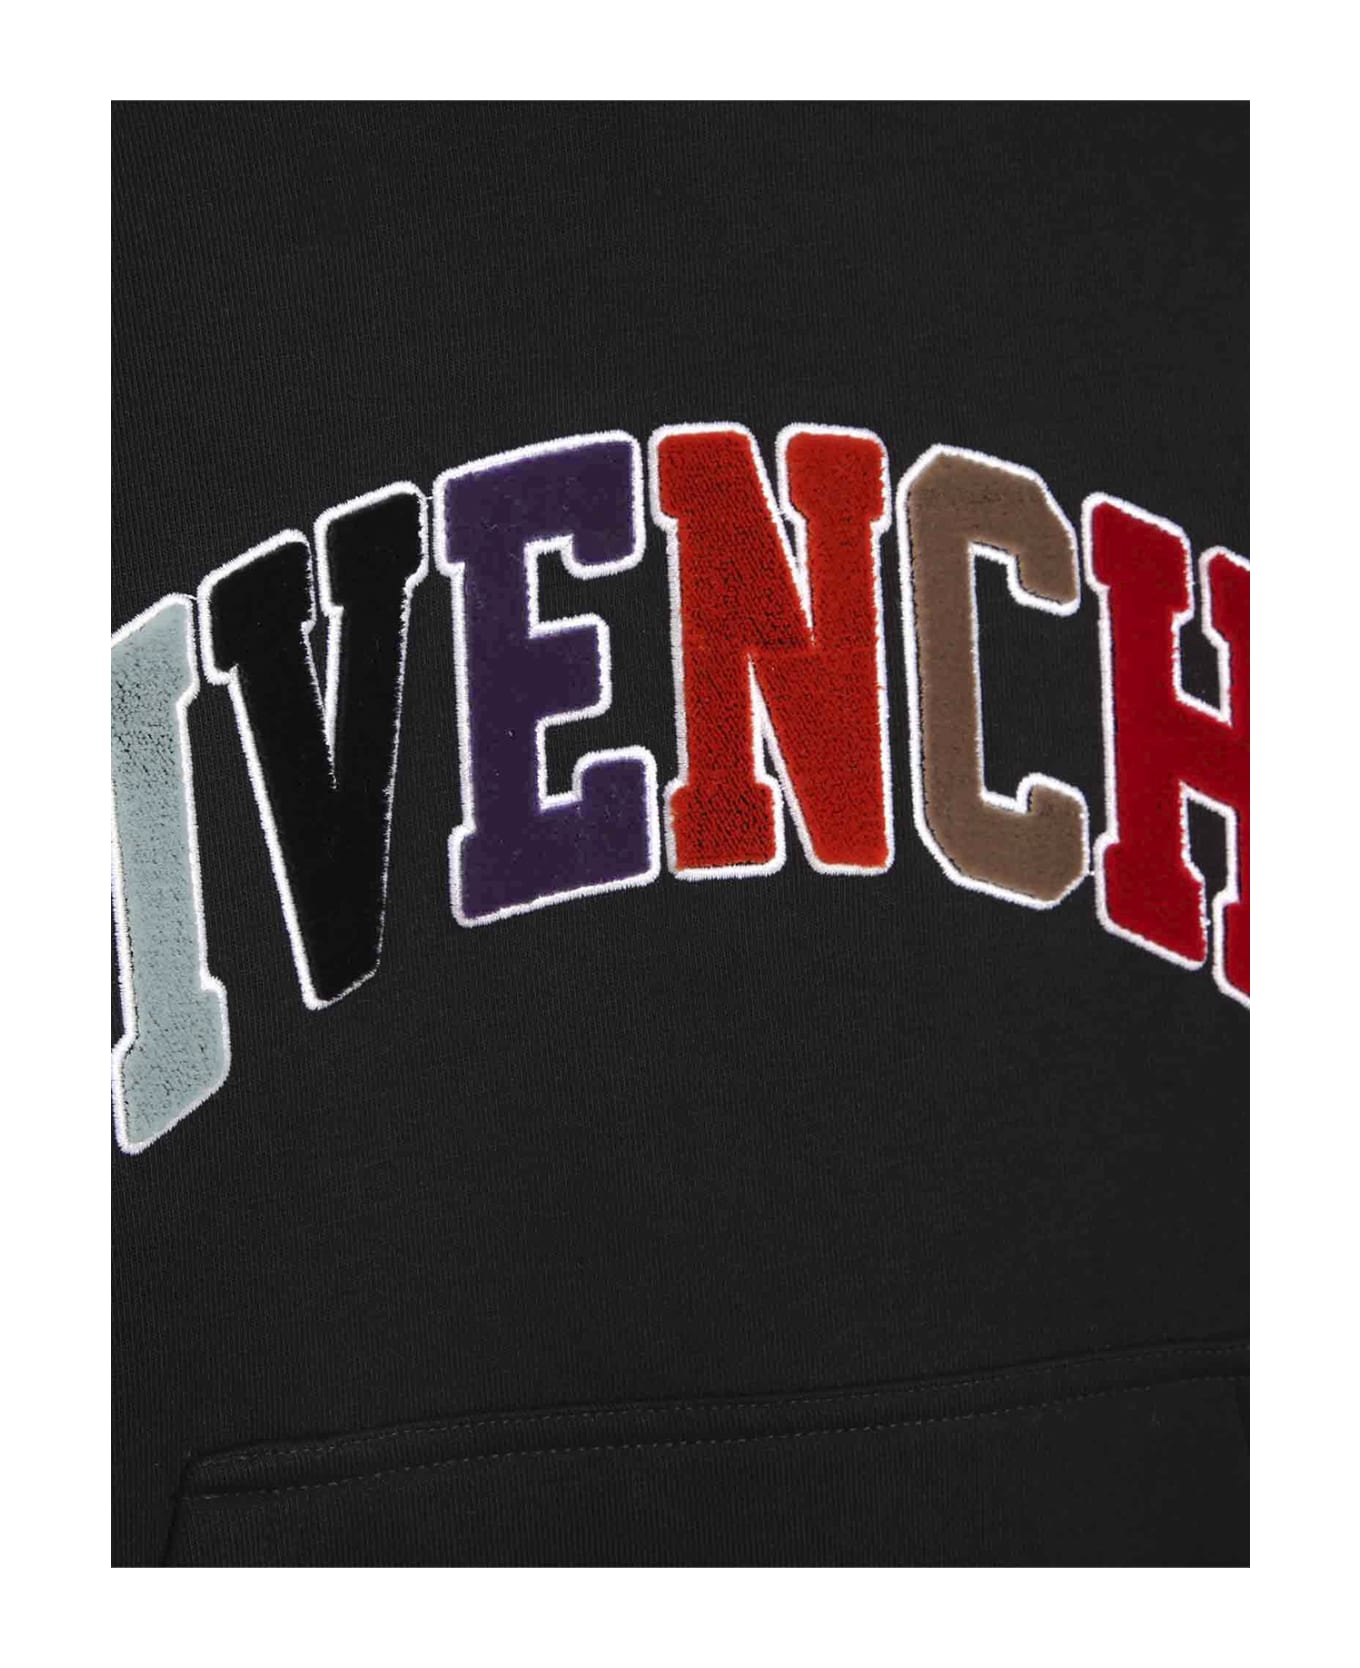 Givenchy Black Hoodie With Multicoloured Signature - Black